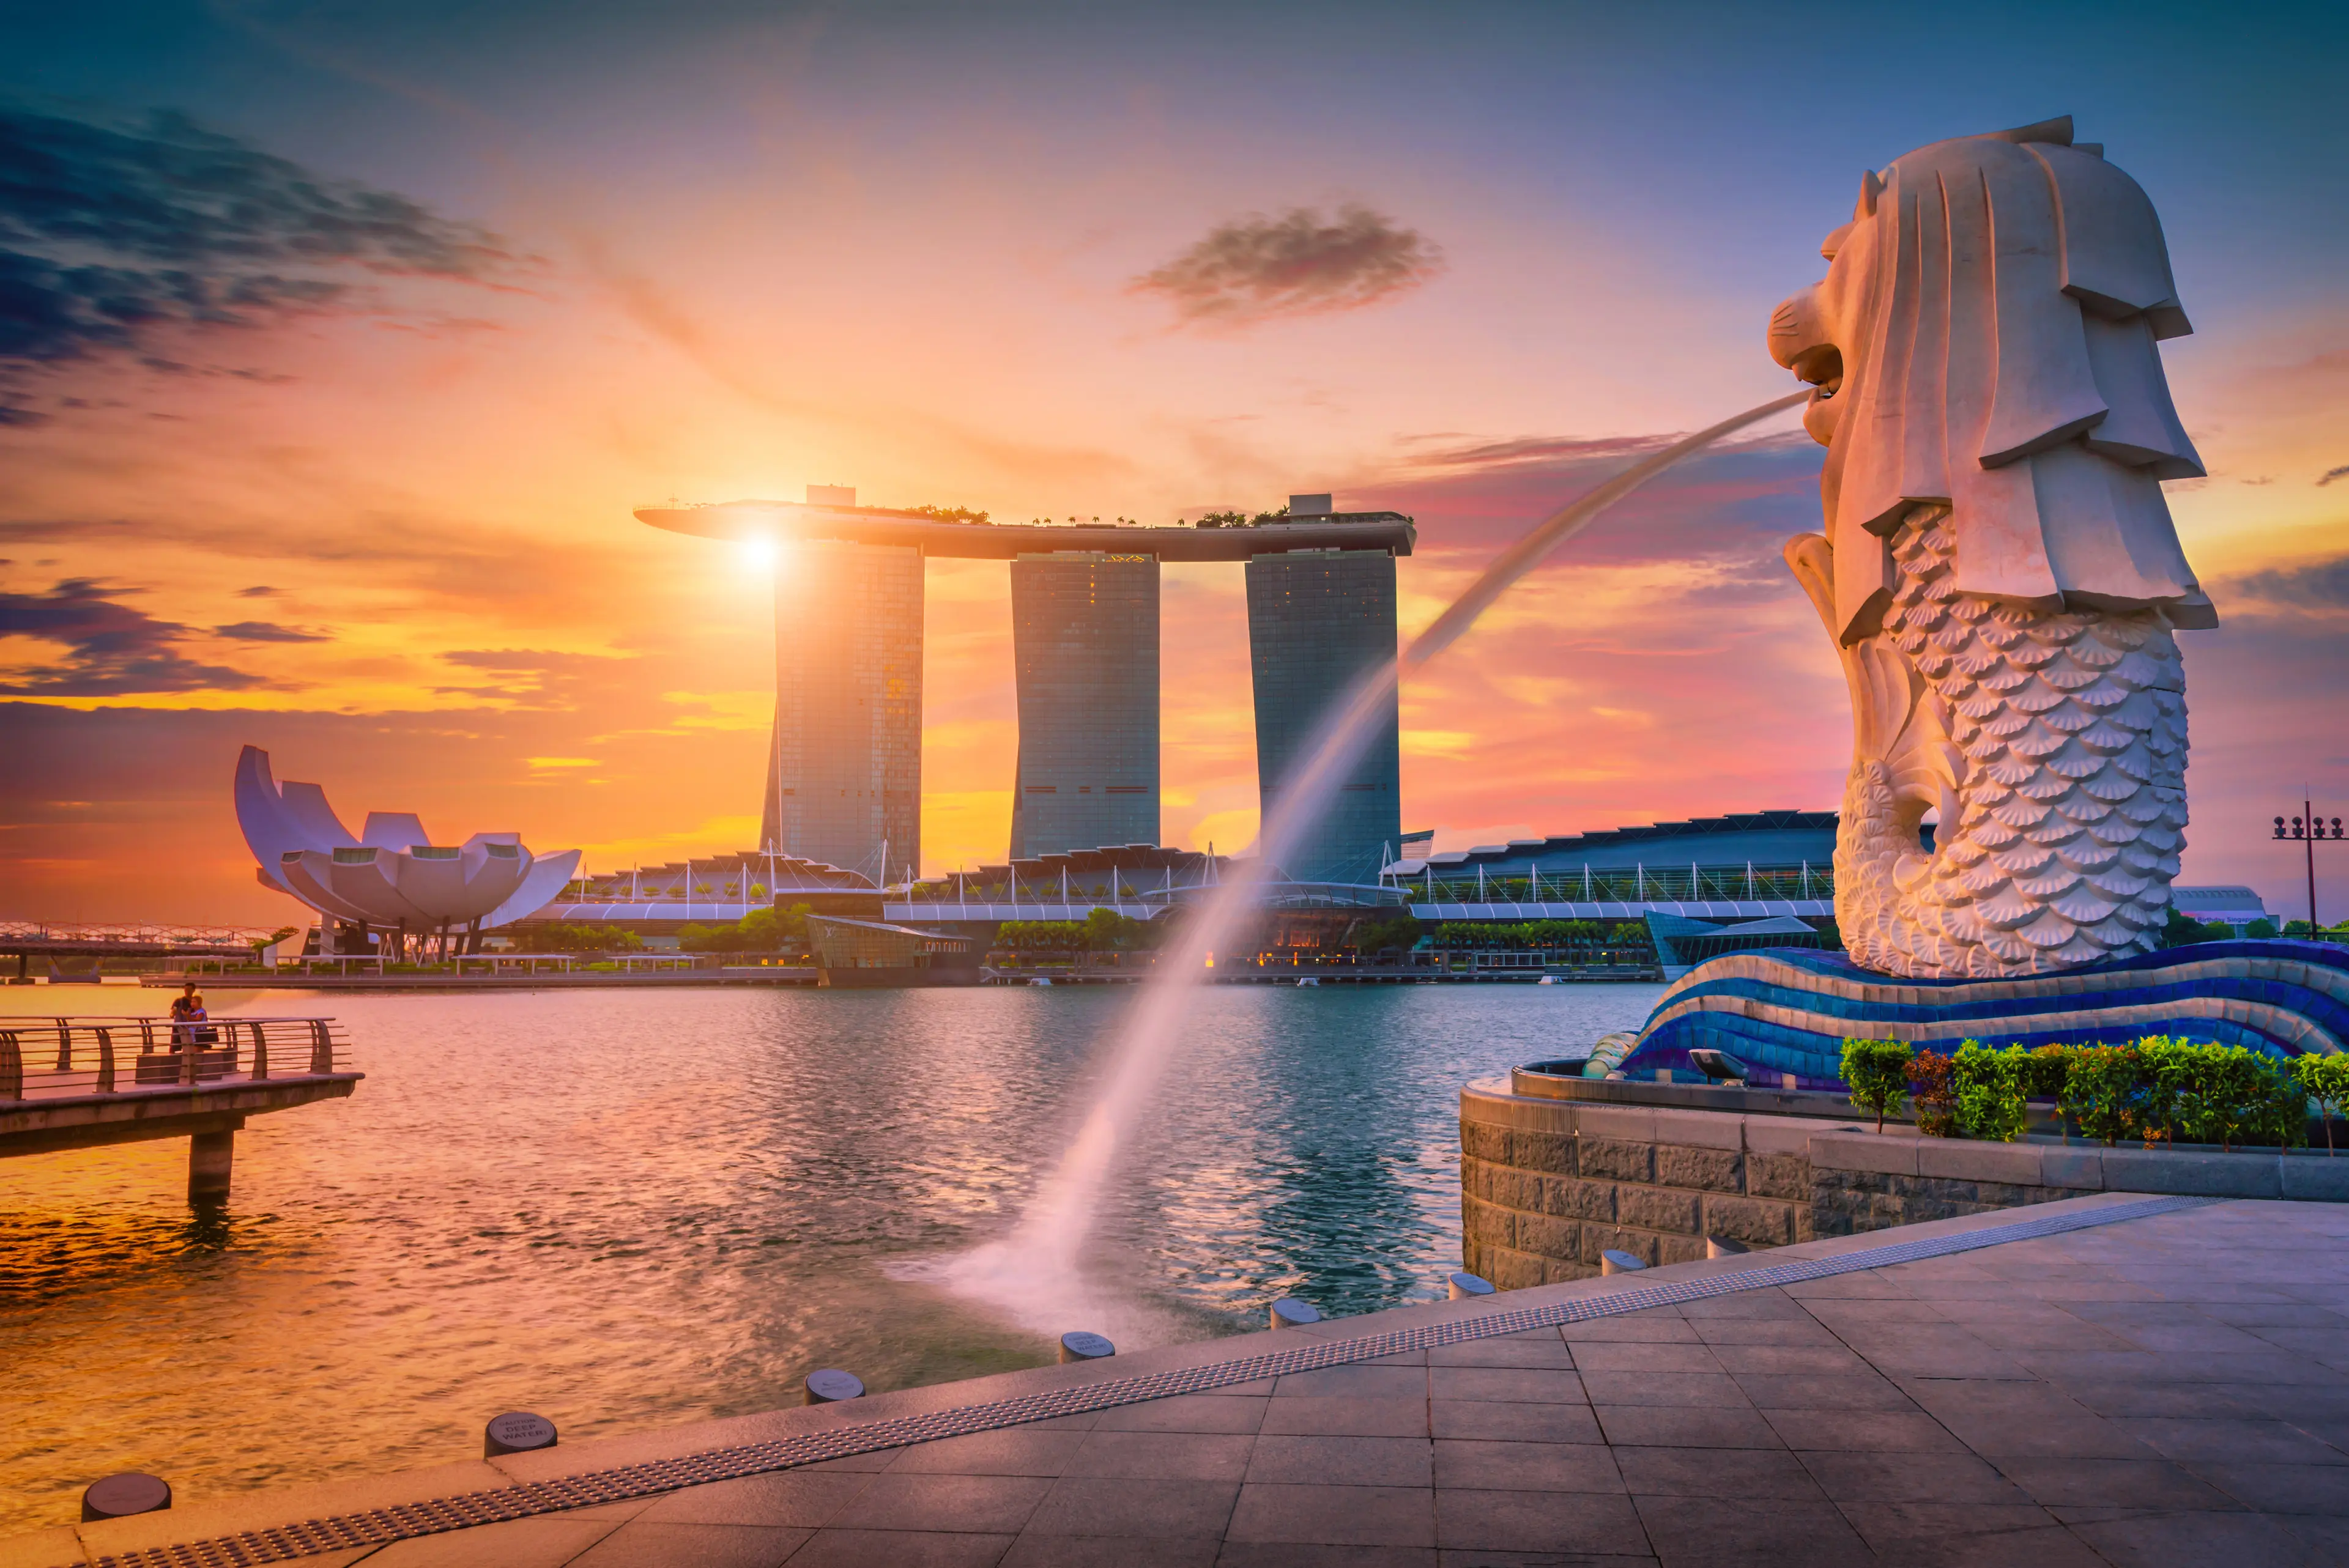 3-Day Singapore Adventure & Nightlife Itinerary with Friends